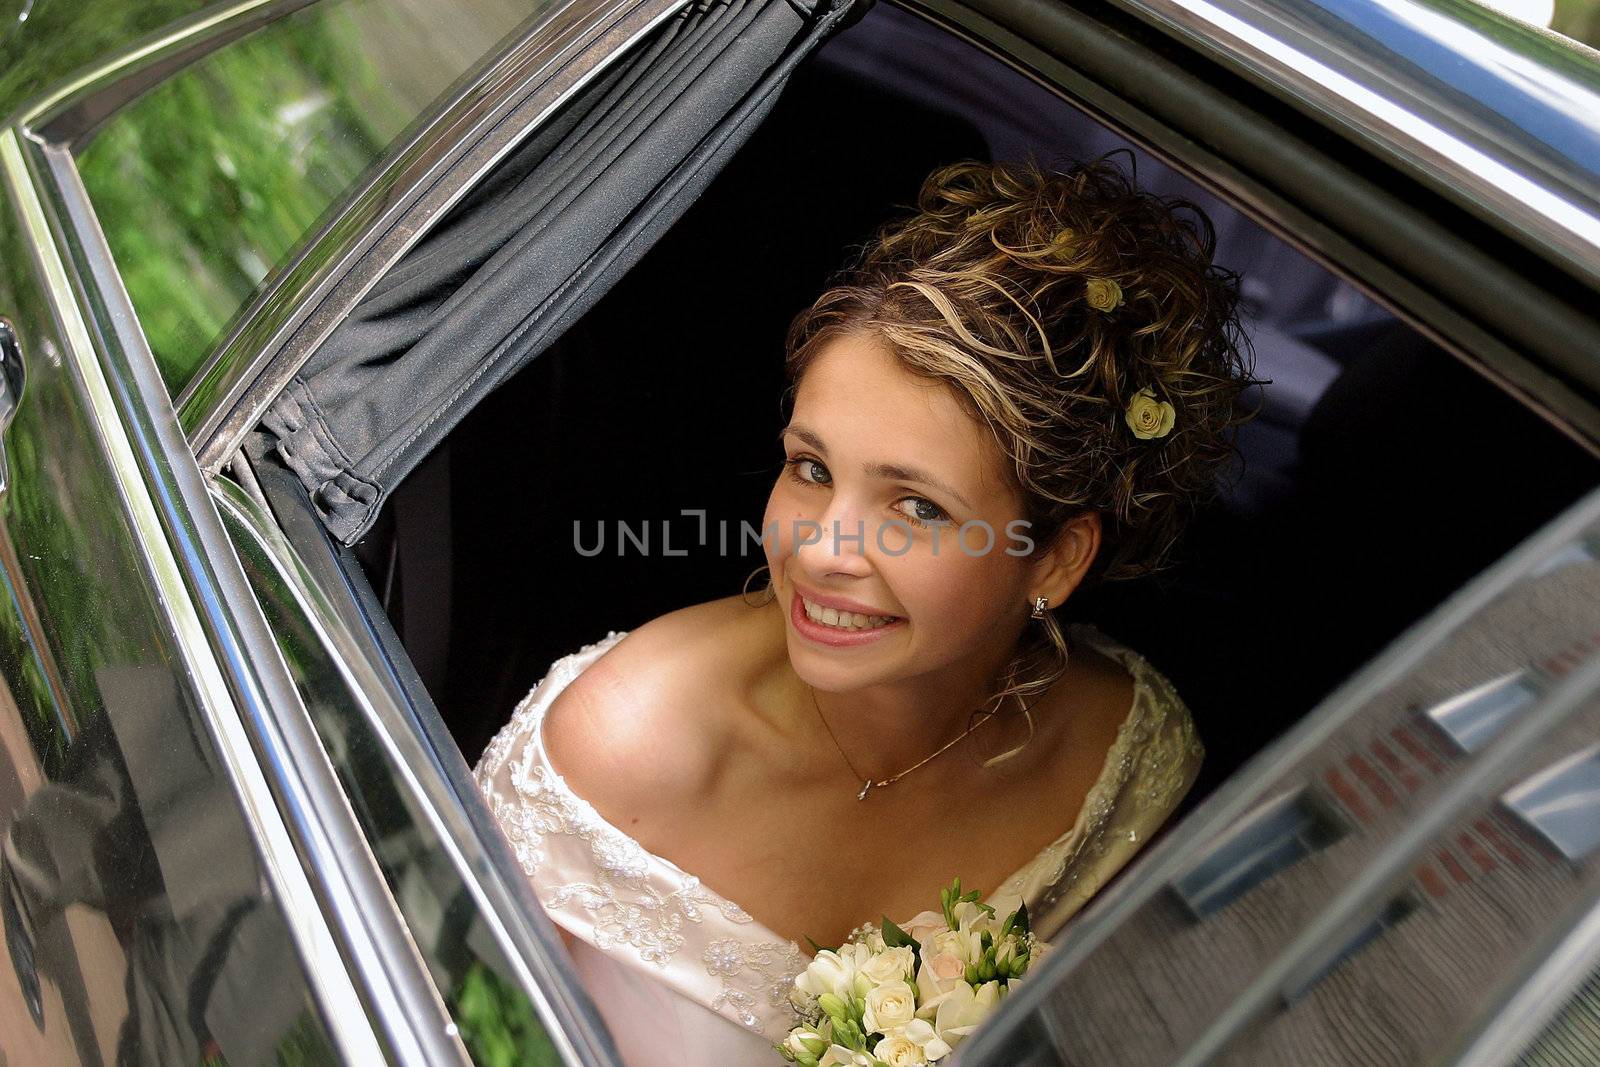 Smiling bride in white on her wedding day, holding bouquet.